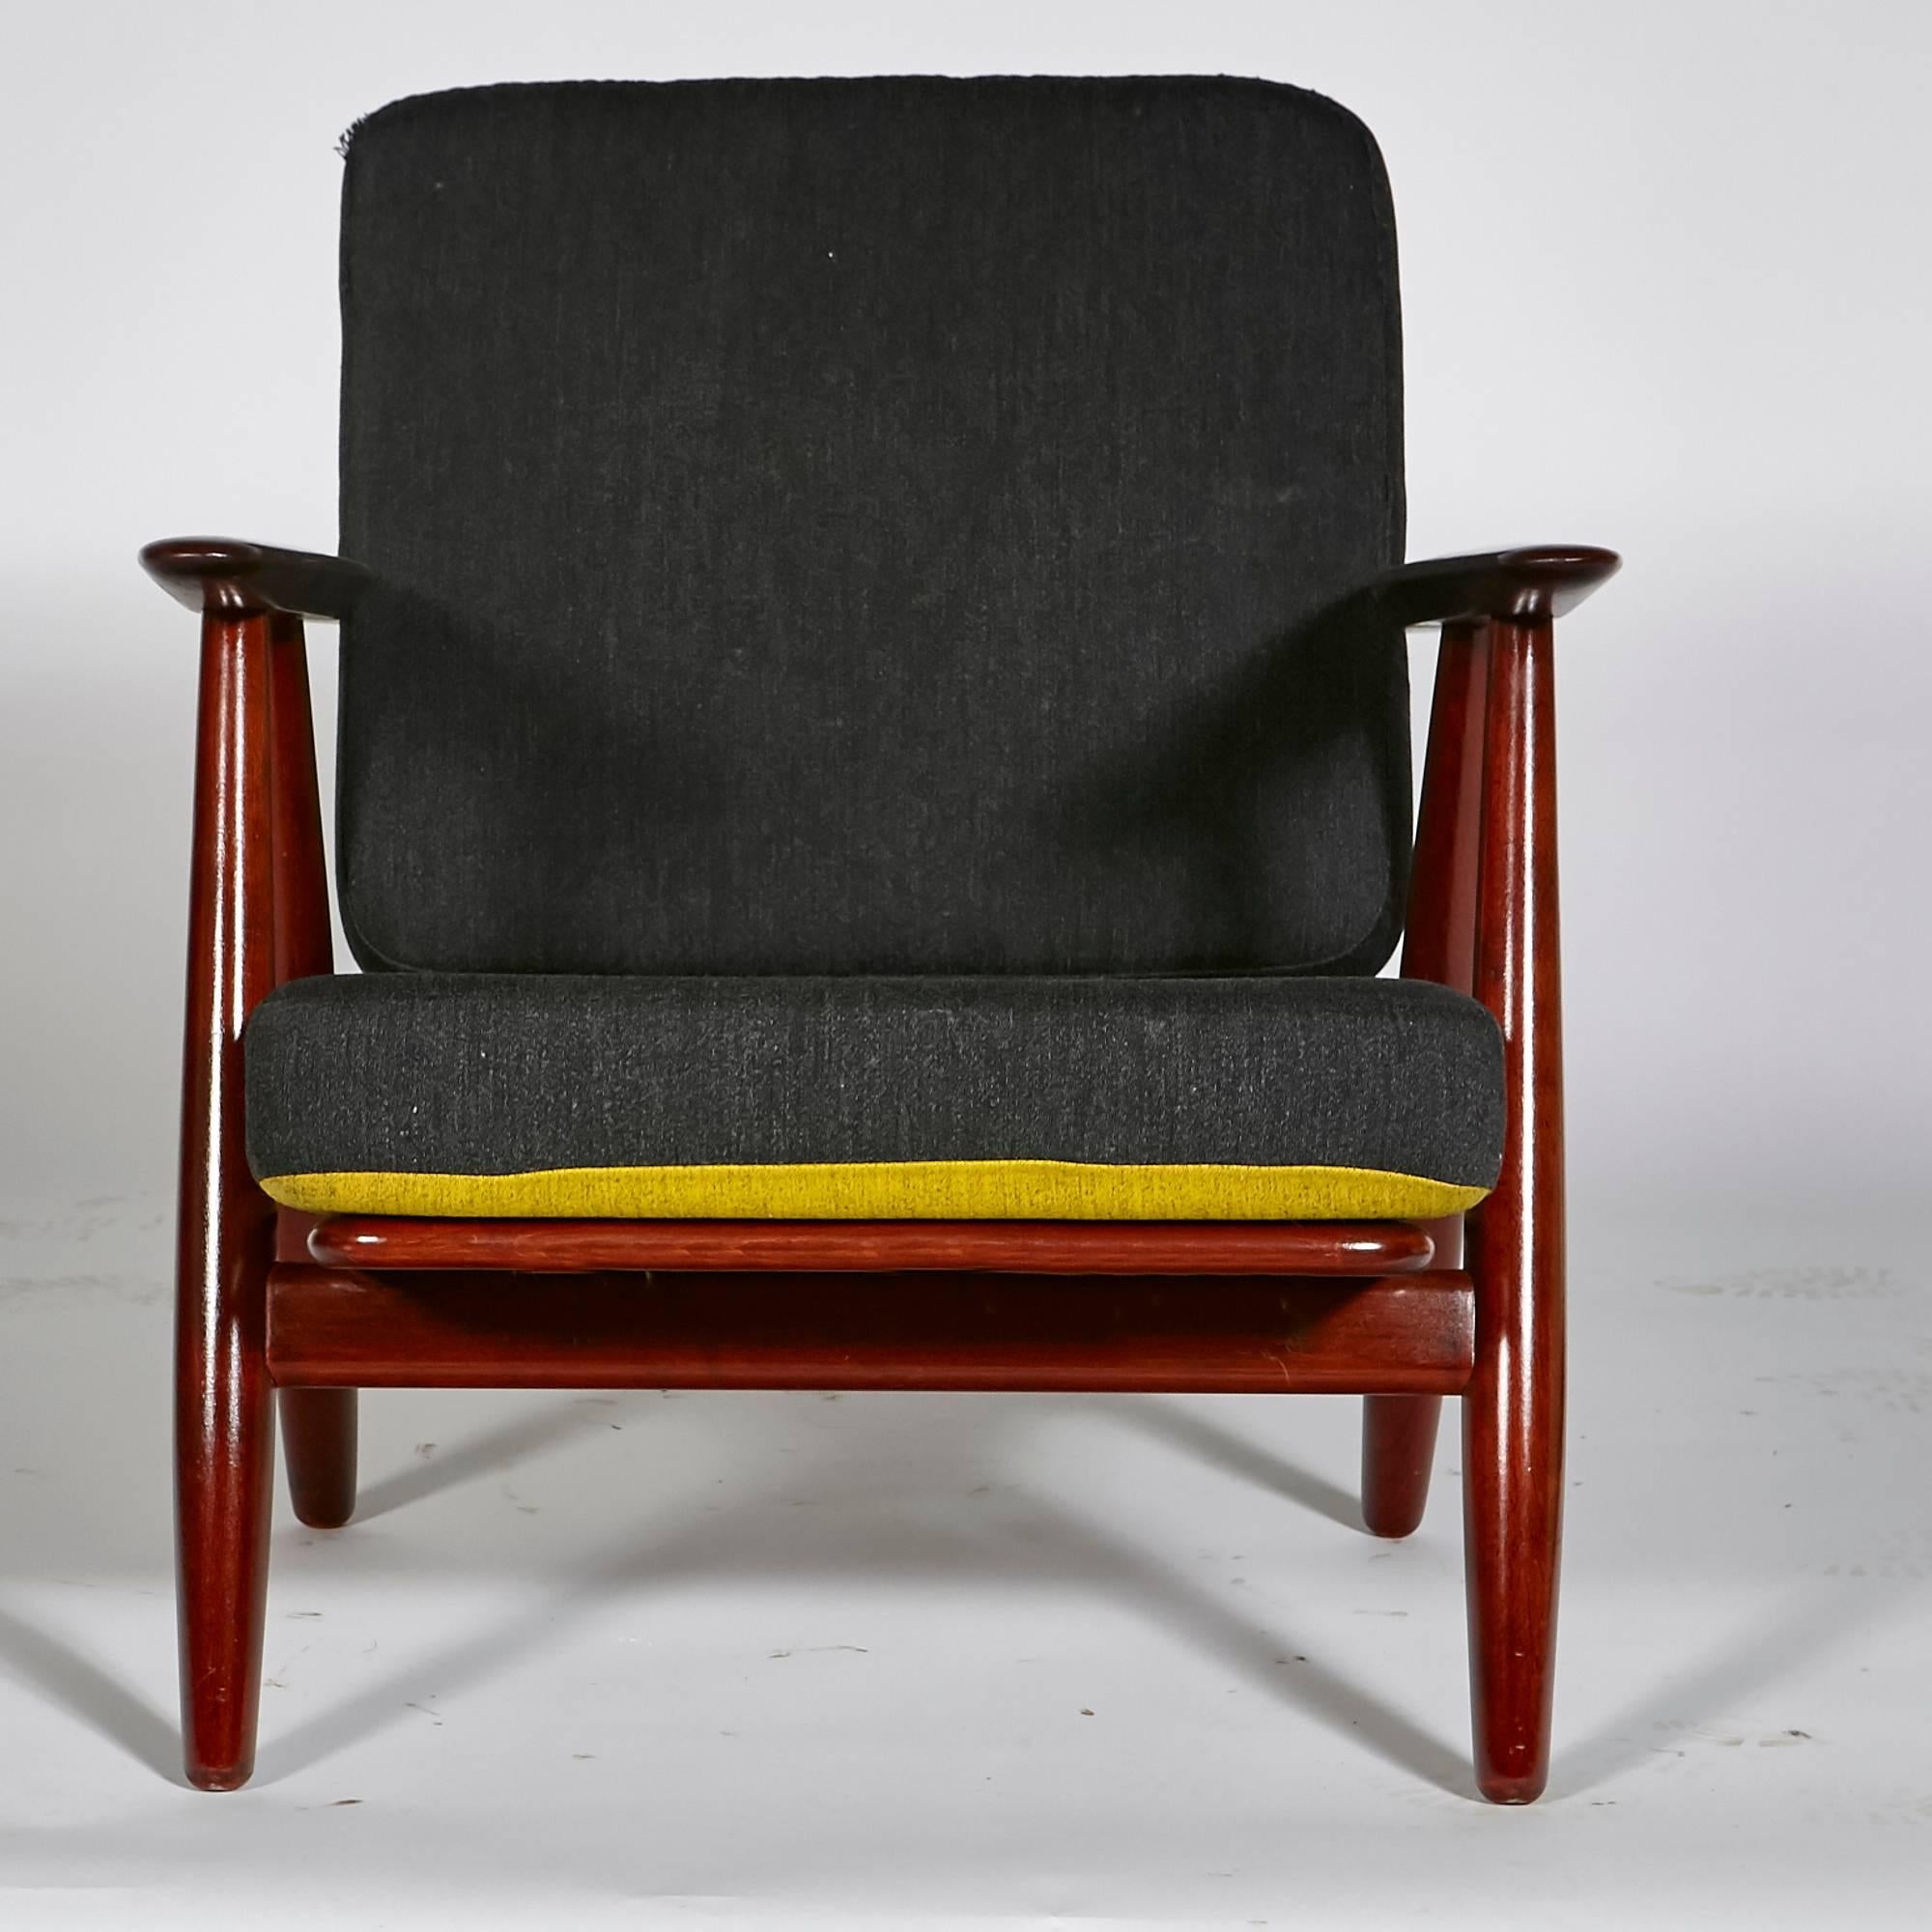 Hans J. Wegner for GETAMA Cigar Chair with Reversible Cushions In Excellent Condition For Sale In Amherst, NH